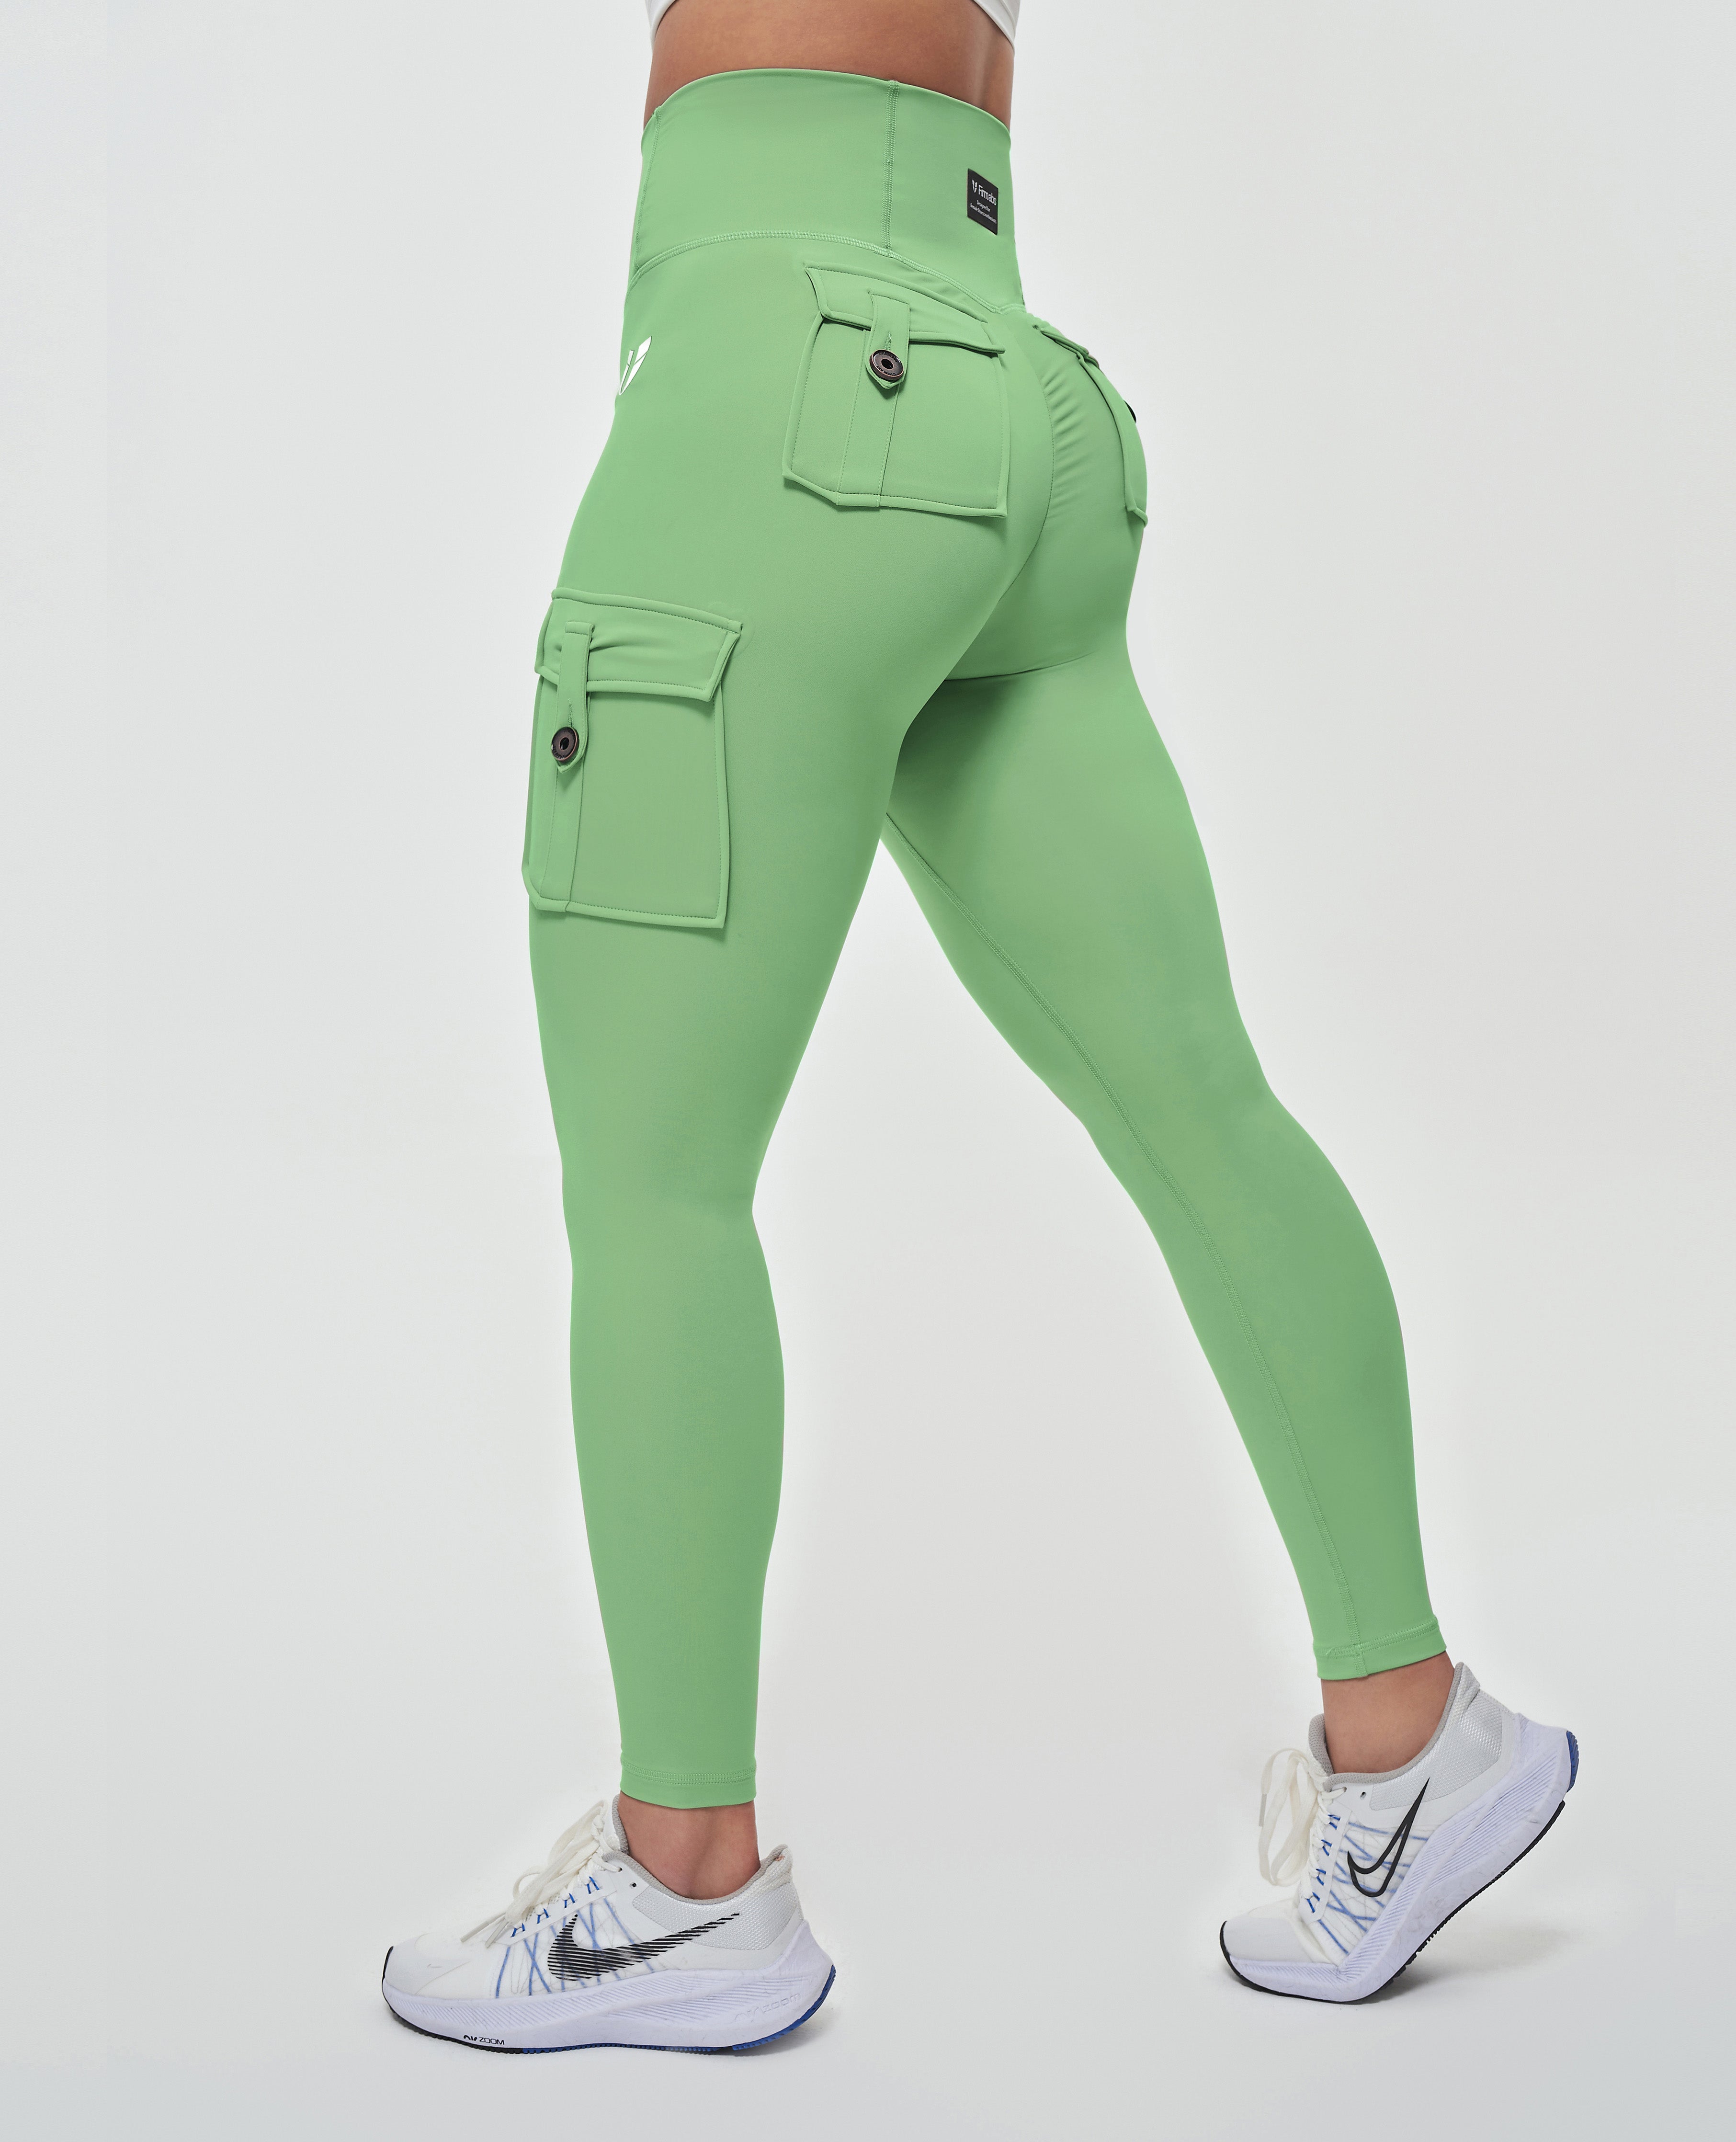 Outlet Clearance Today Sales Cargo Leggings with Pockets for Women  High Waisted Tummy Control Leggings Yoga Workout Pants Athletic  Wearlightening Deals Todays Deals in Clearance Army Green at  Women's  Clothing